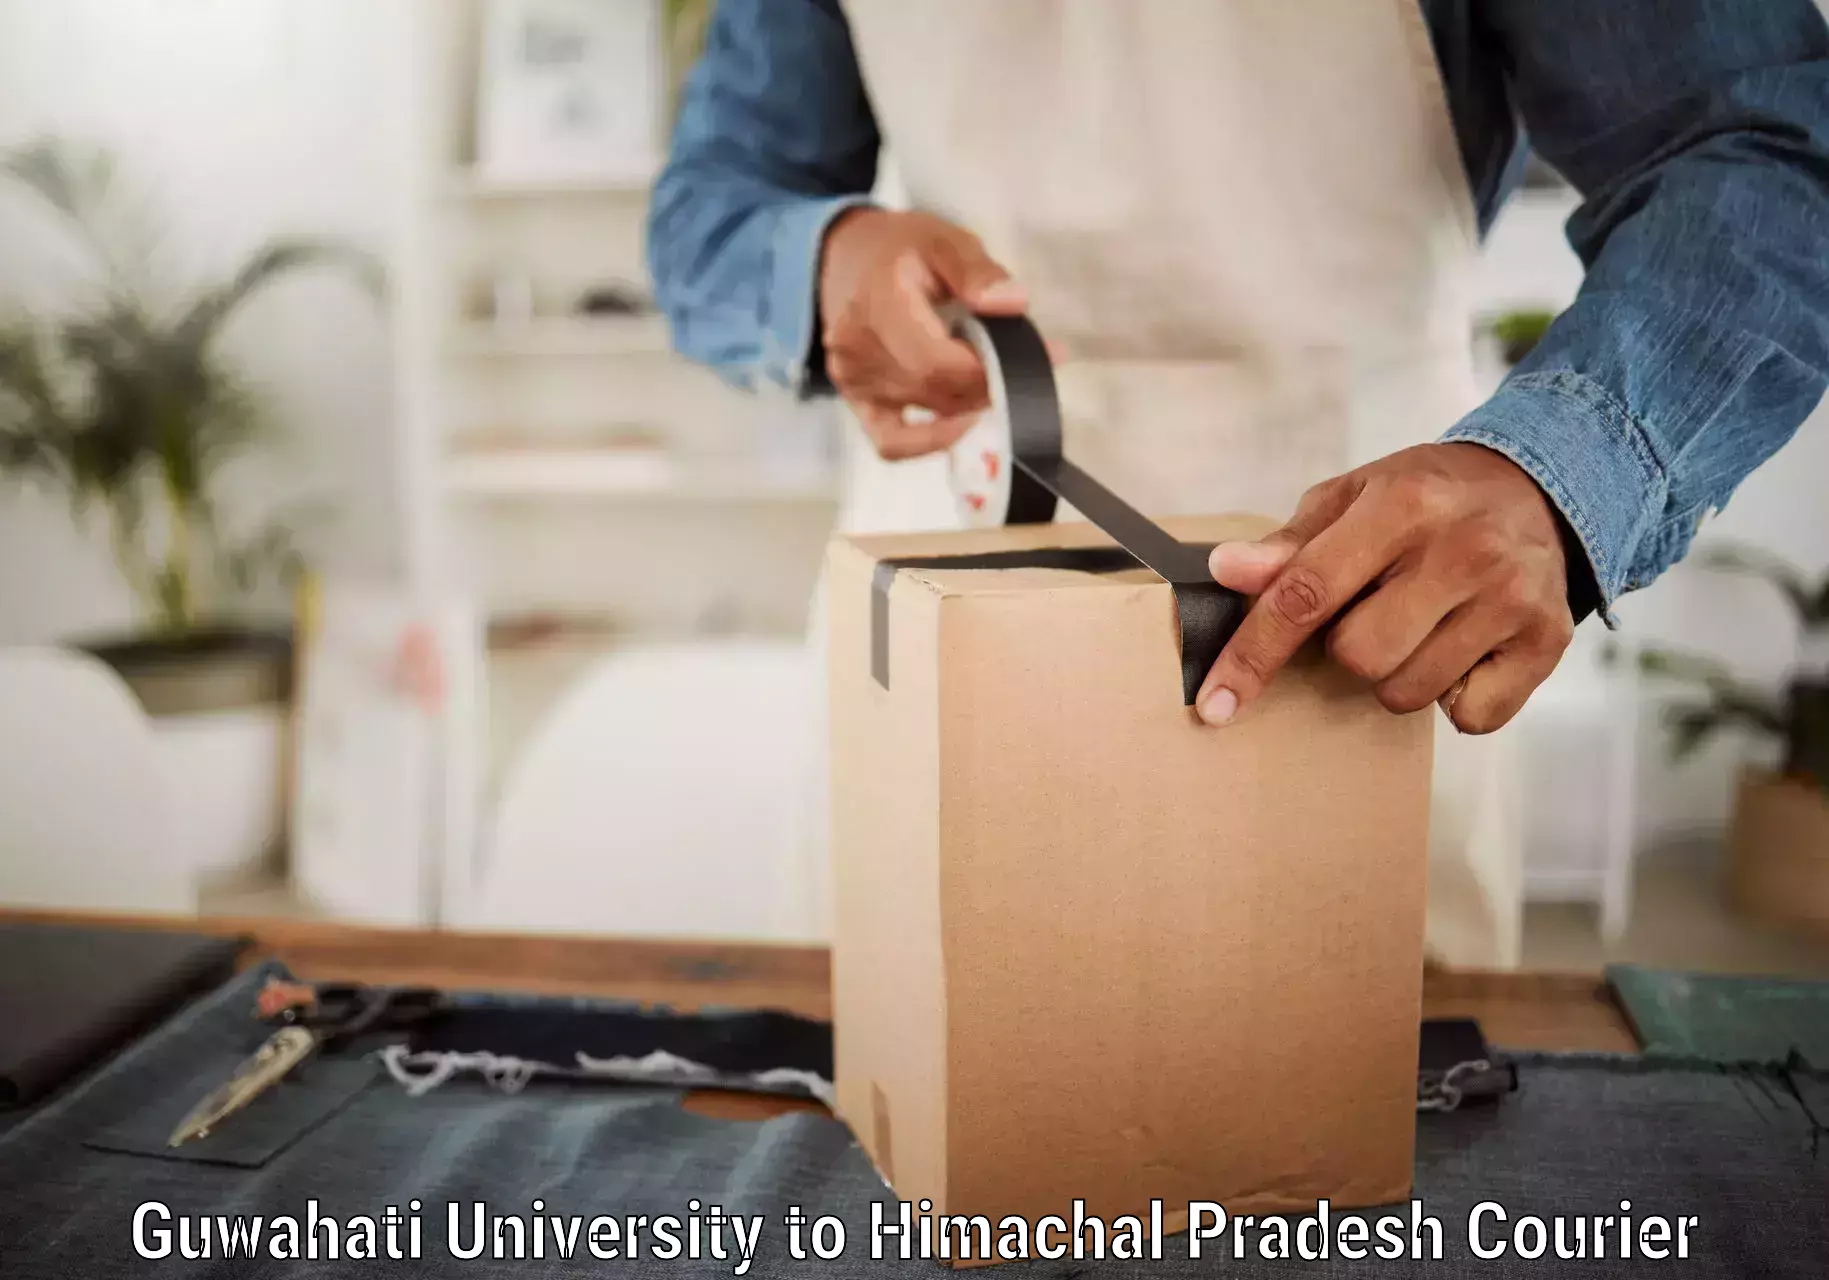 Air courier services in Guwahati University to Banjar